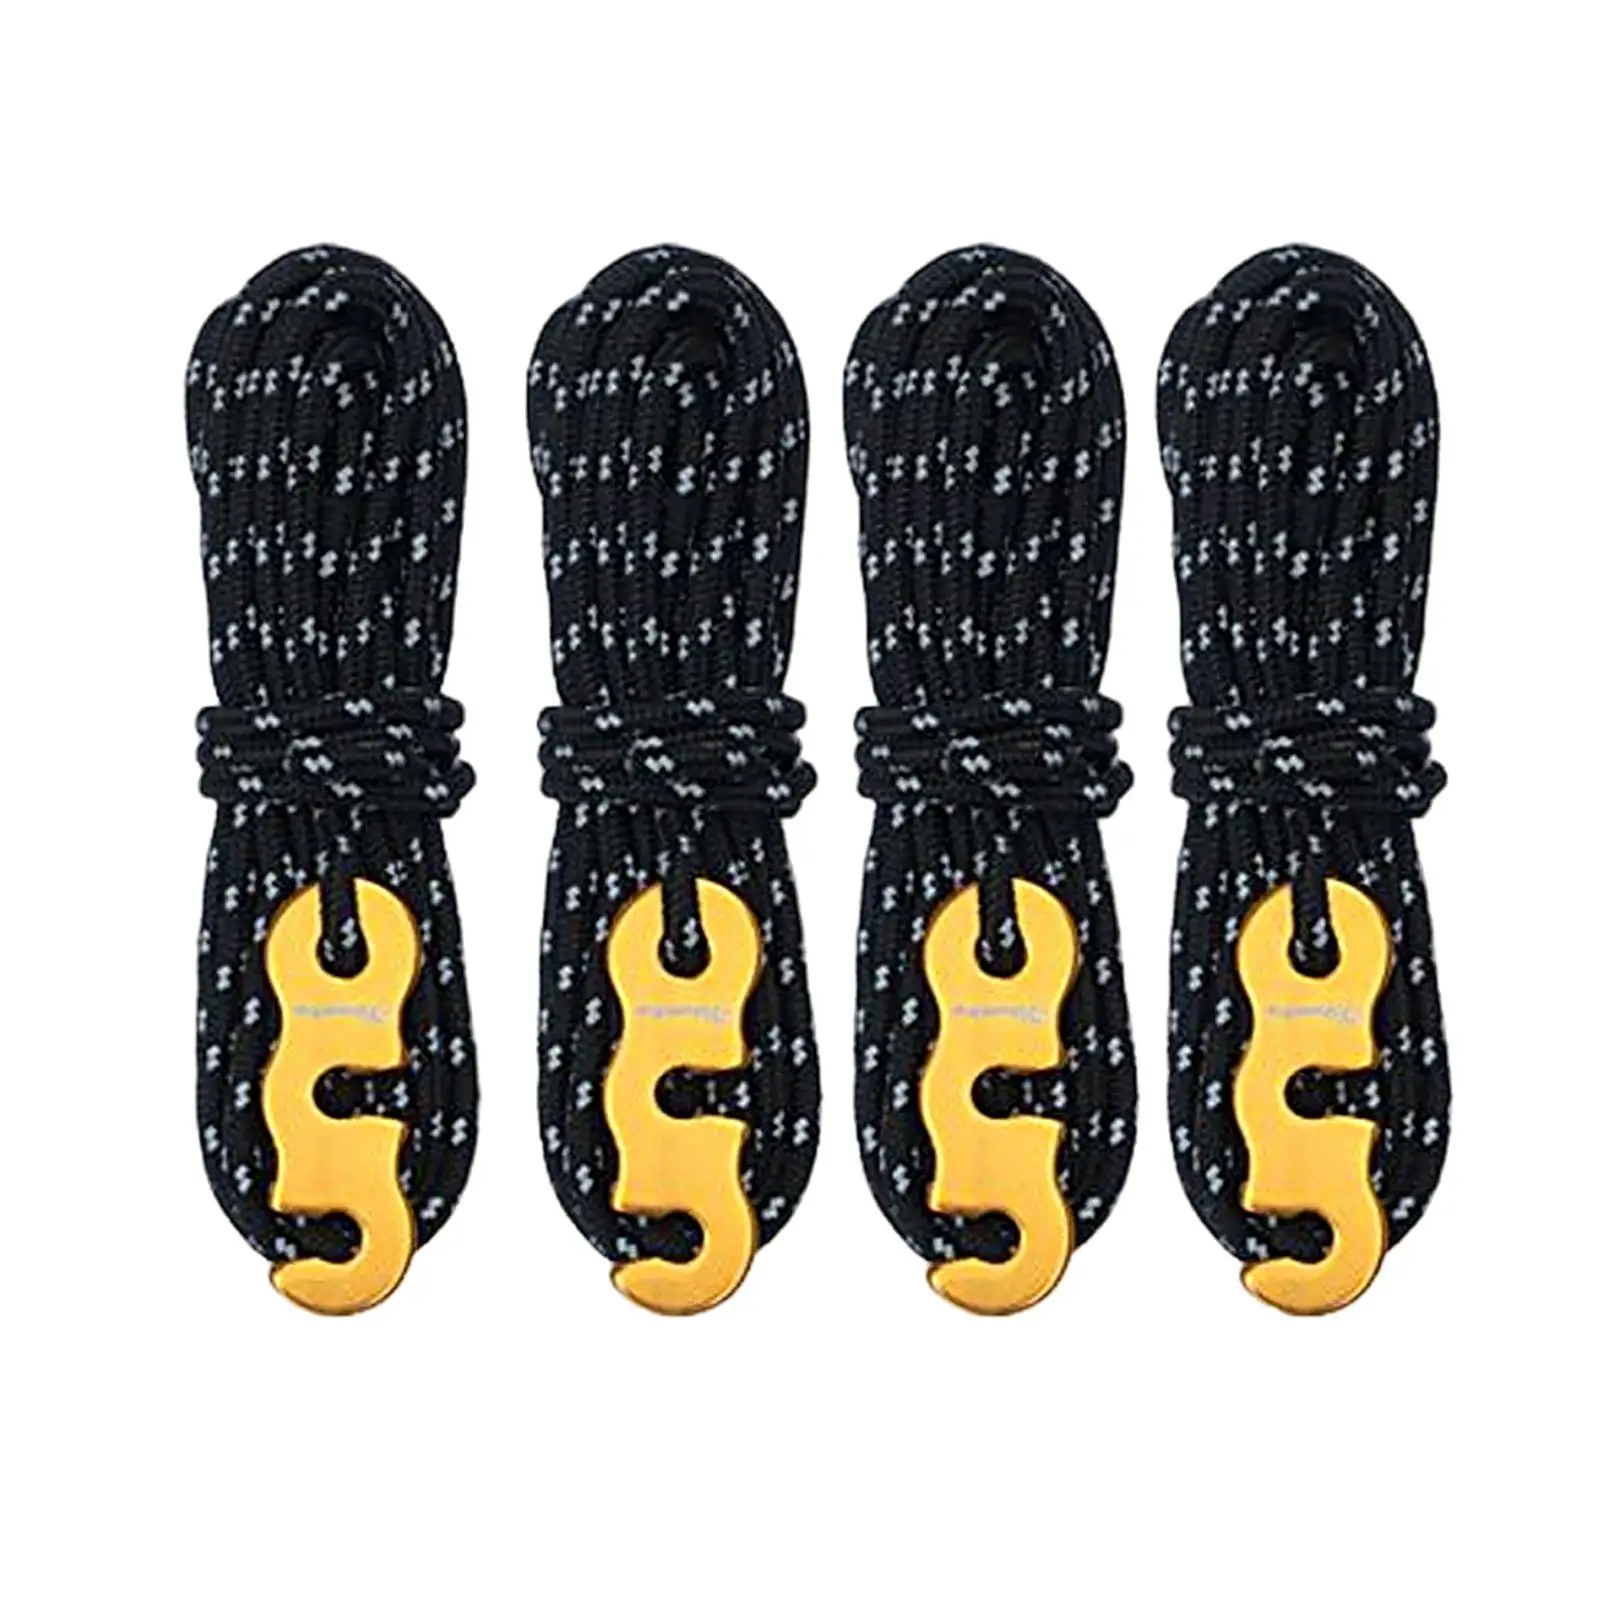 4 Pieces Tent Rope Reflective guyline 3mm Diameter for Hiking Accessories